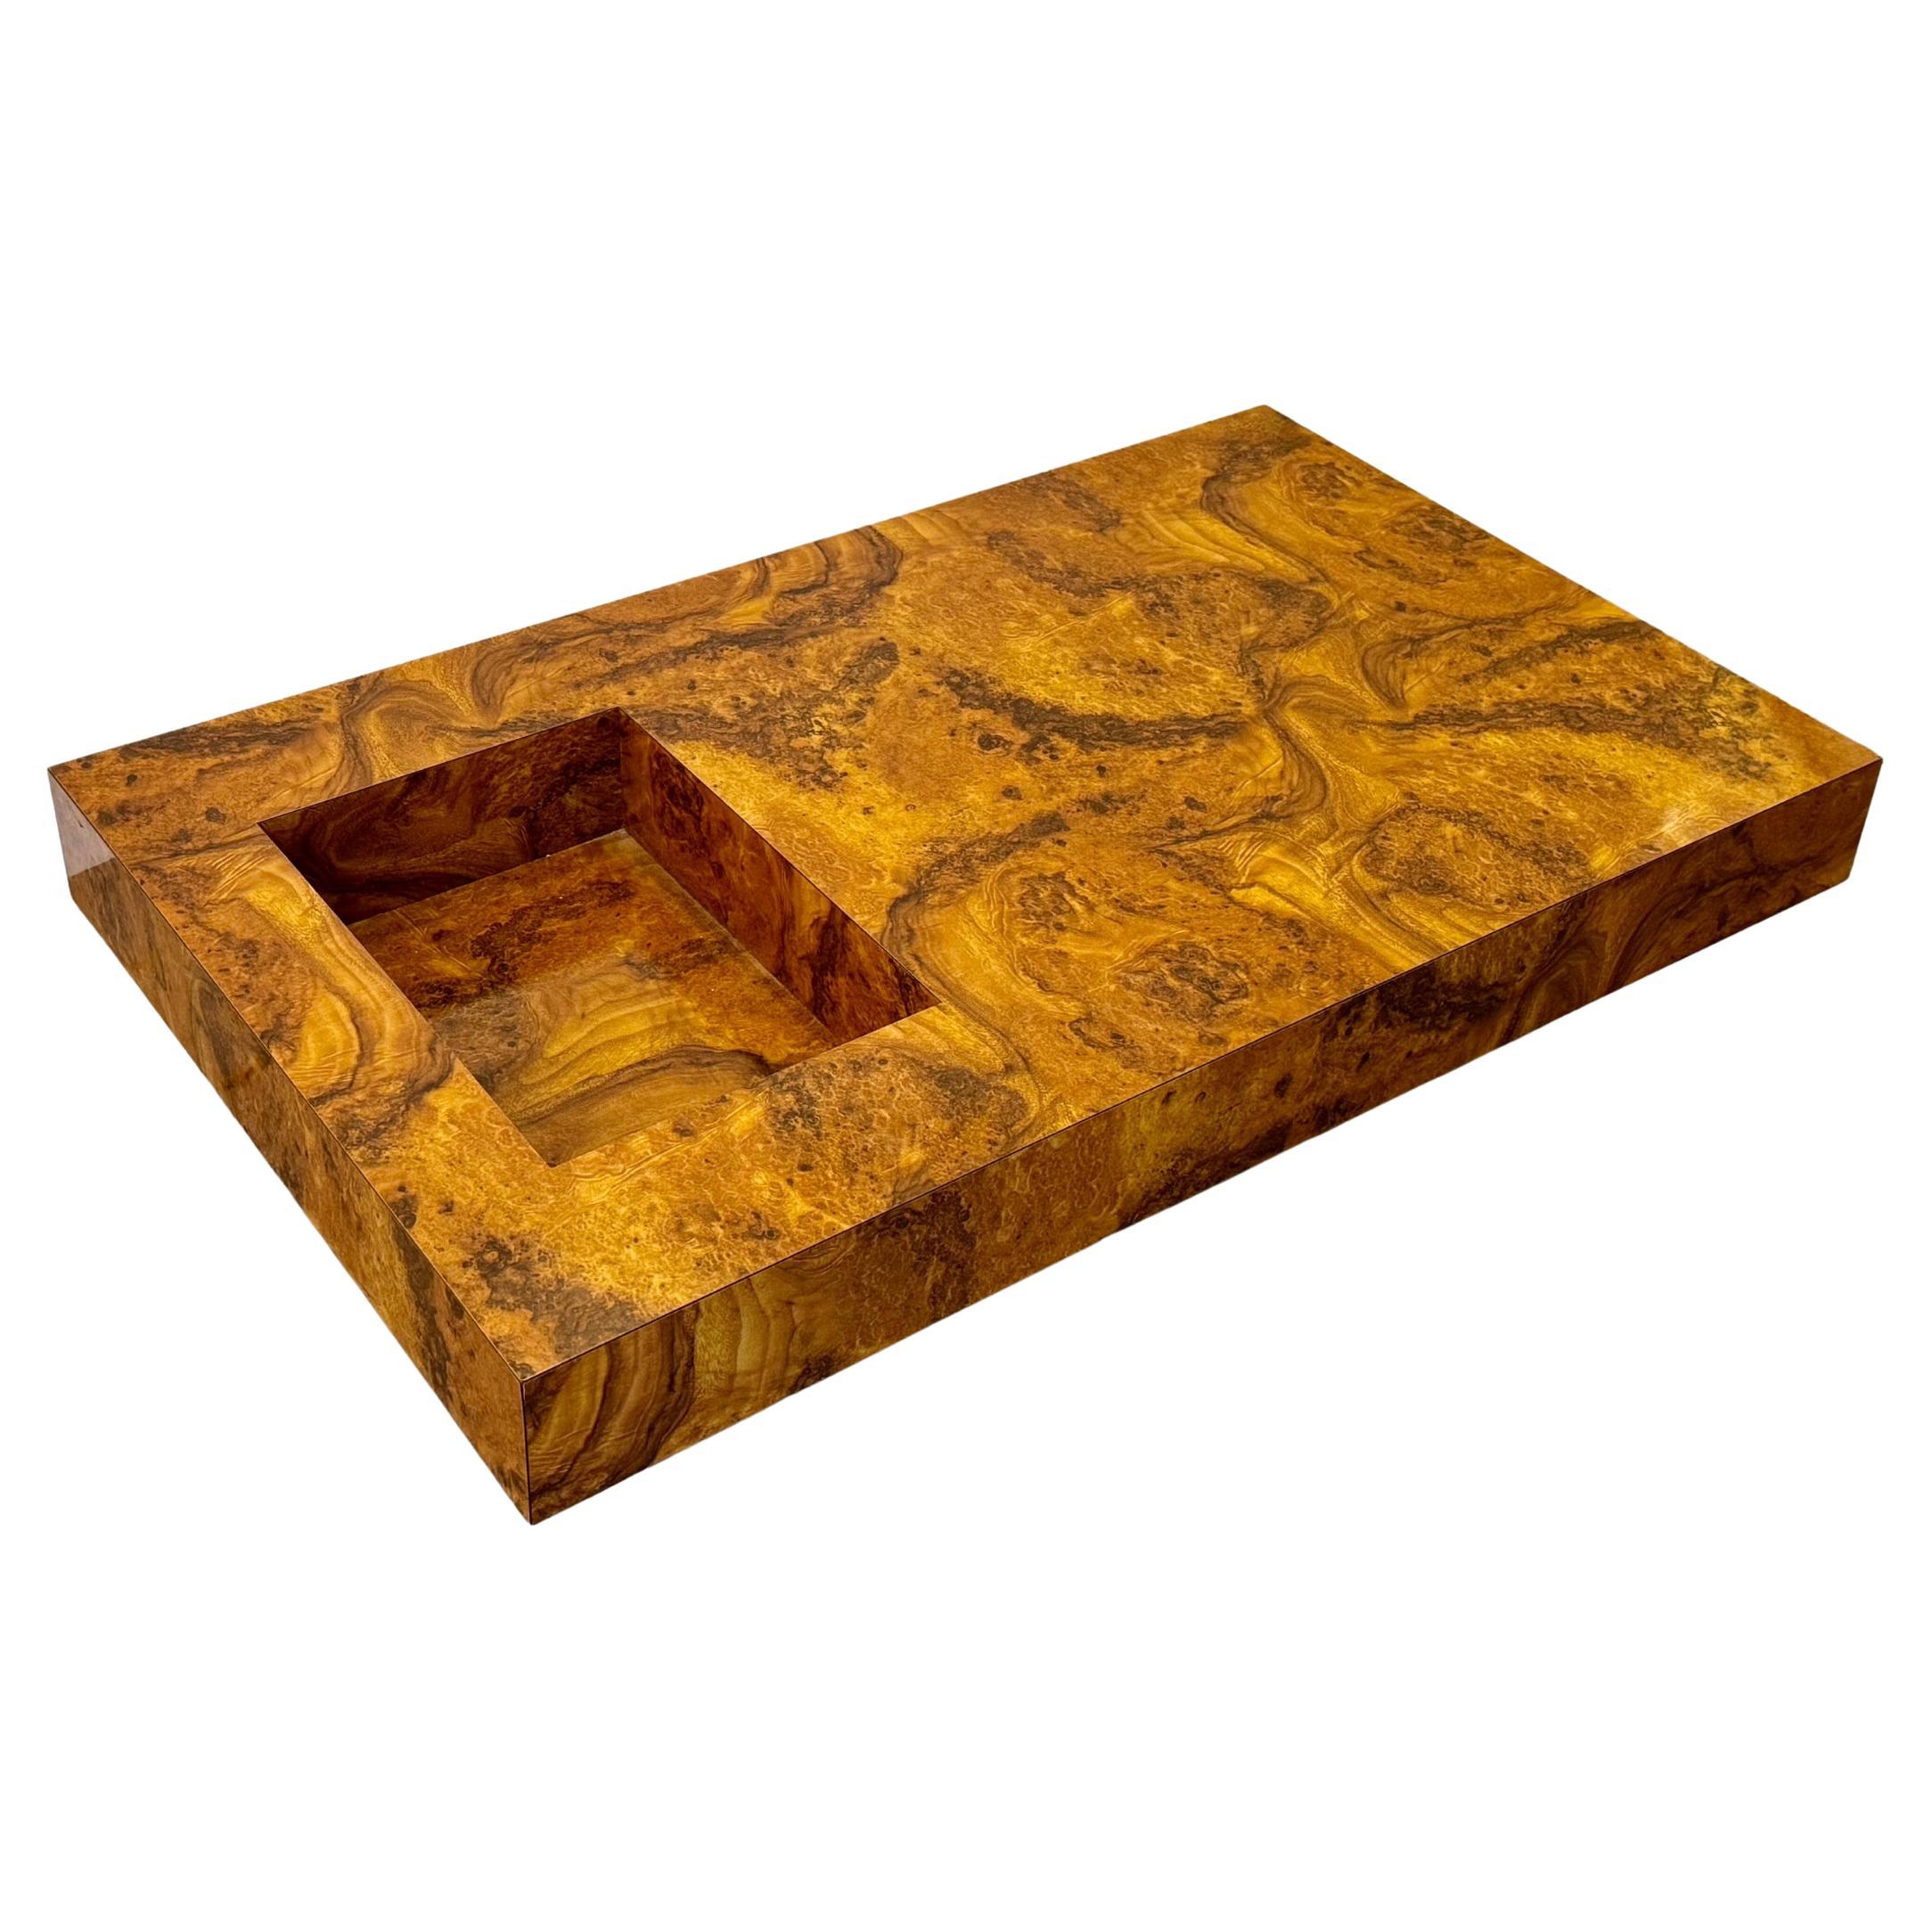 Modernist 1970s Coffee Table with Inset Bar in Burl Wood Laminate by Willy Rizzo